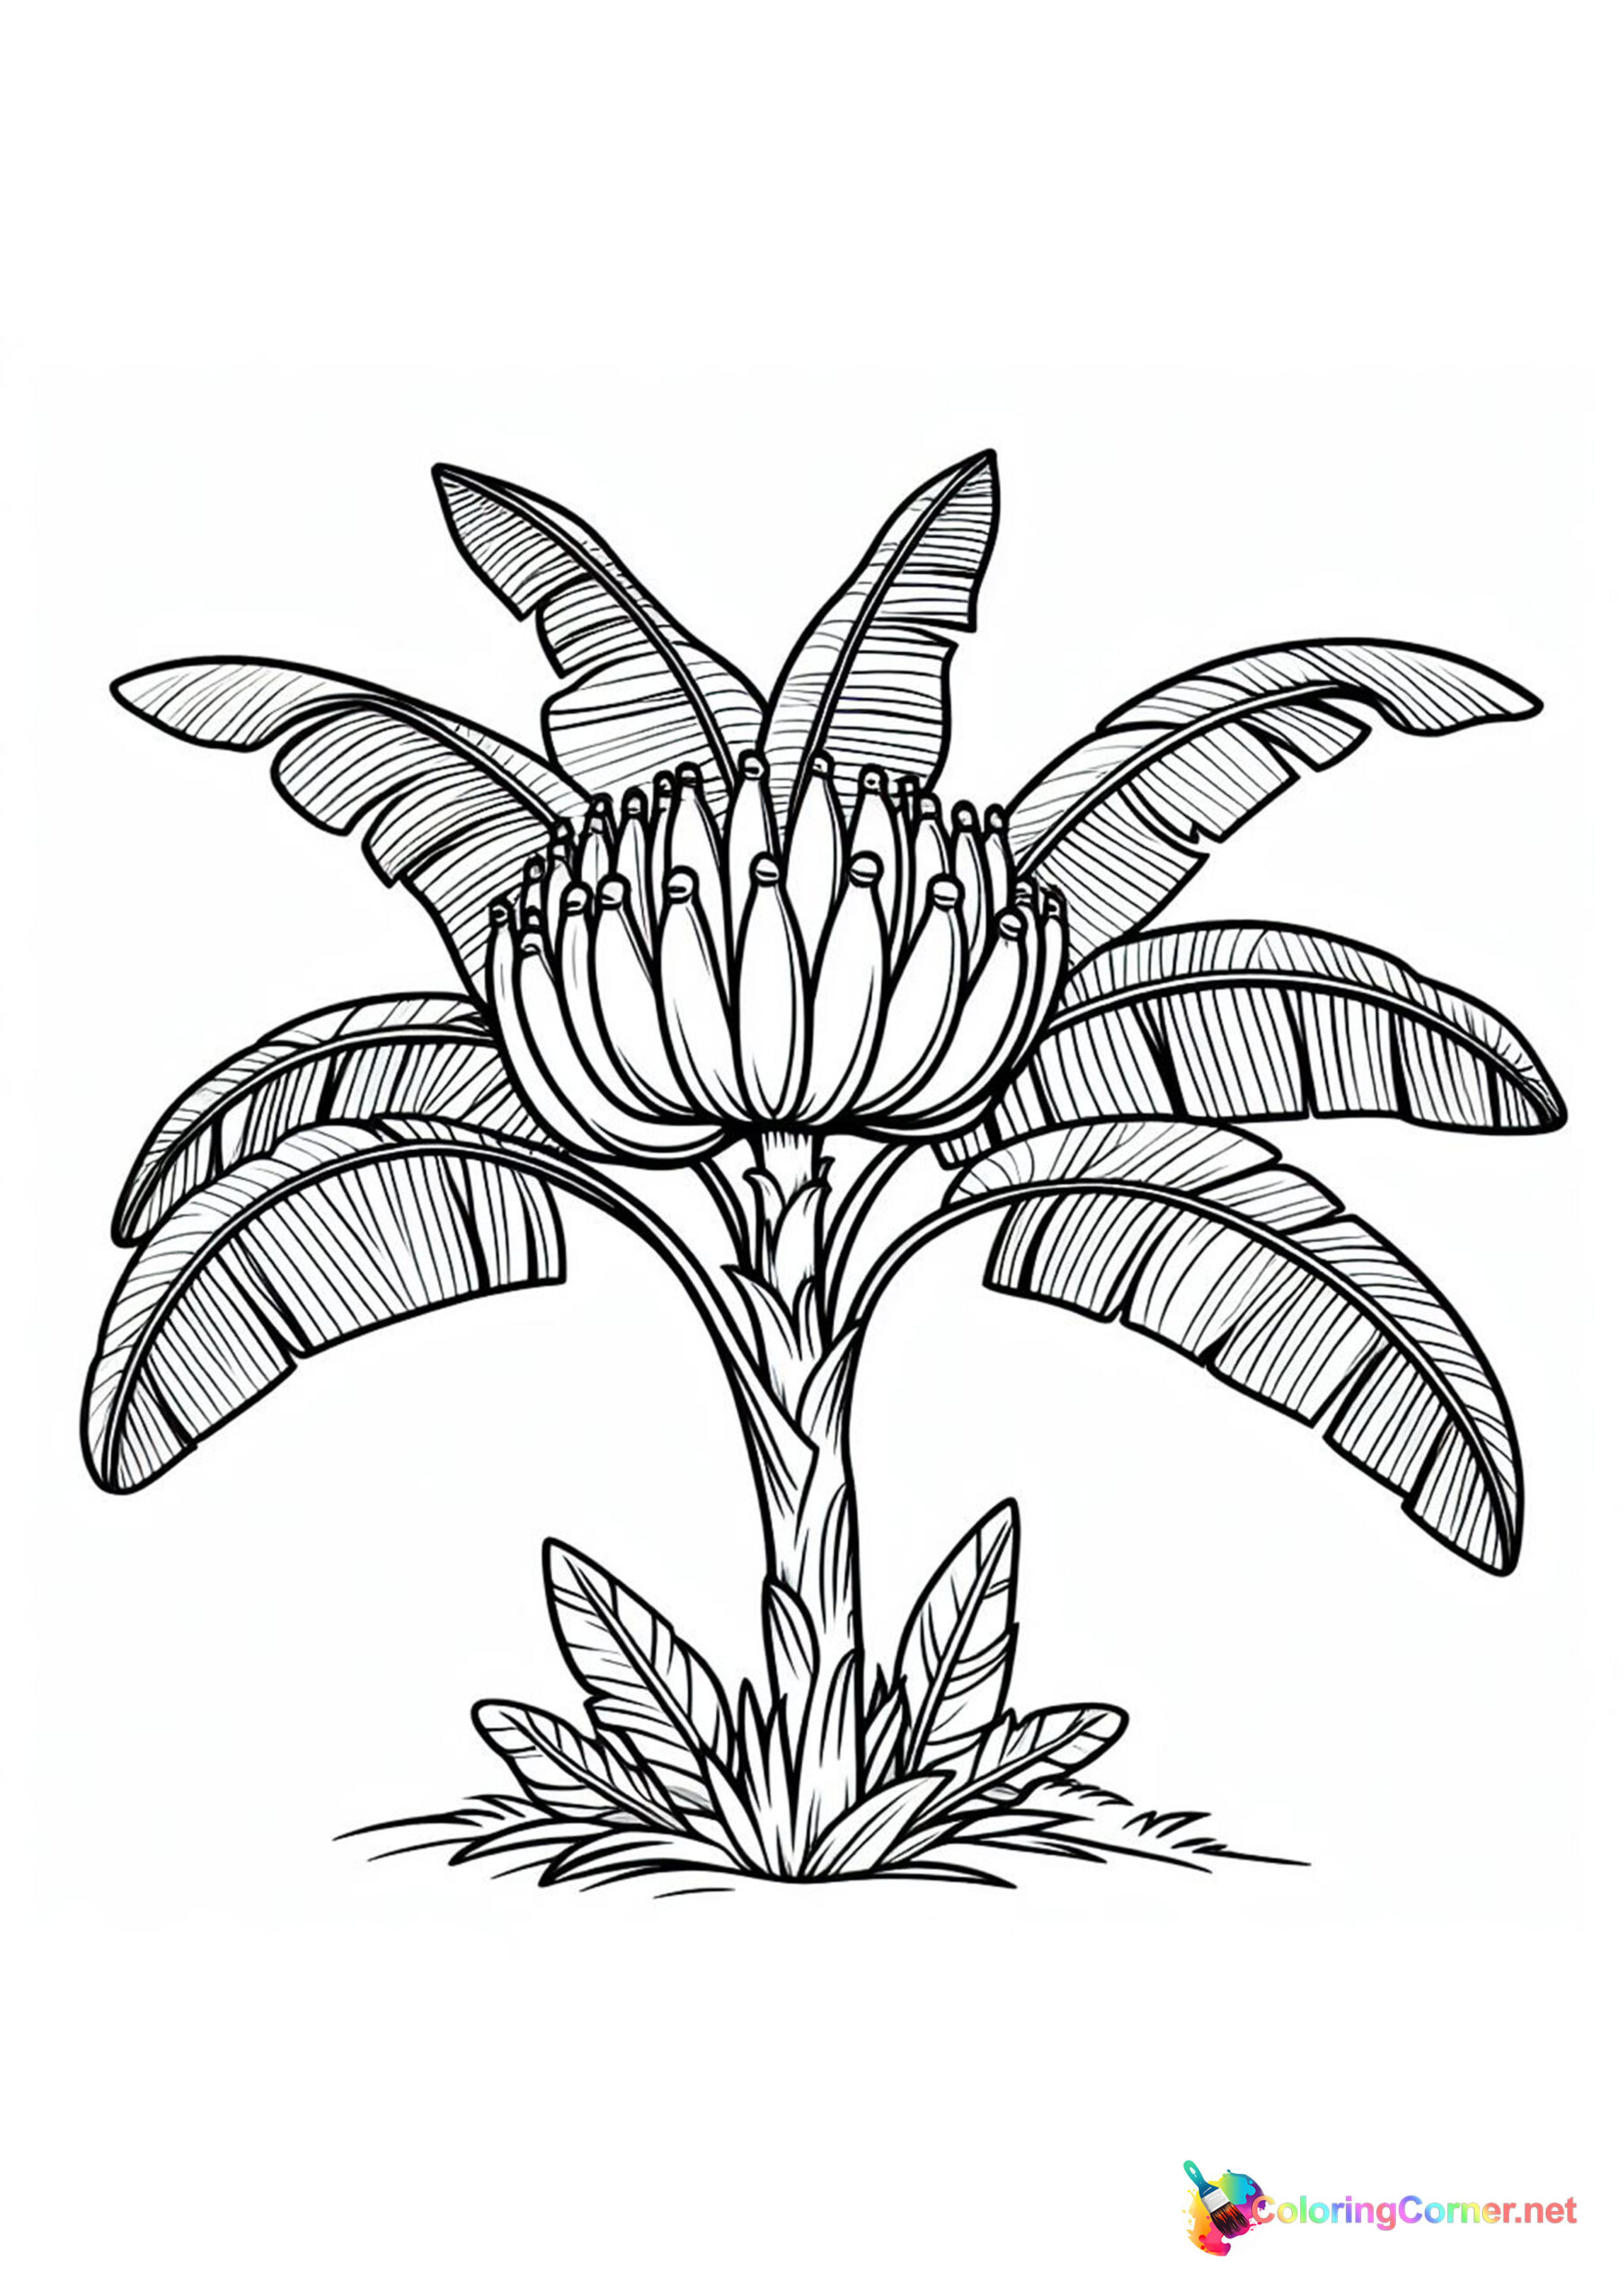 Tree coloring page